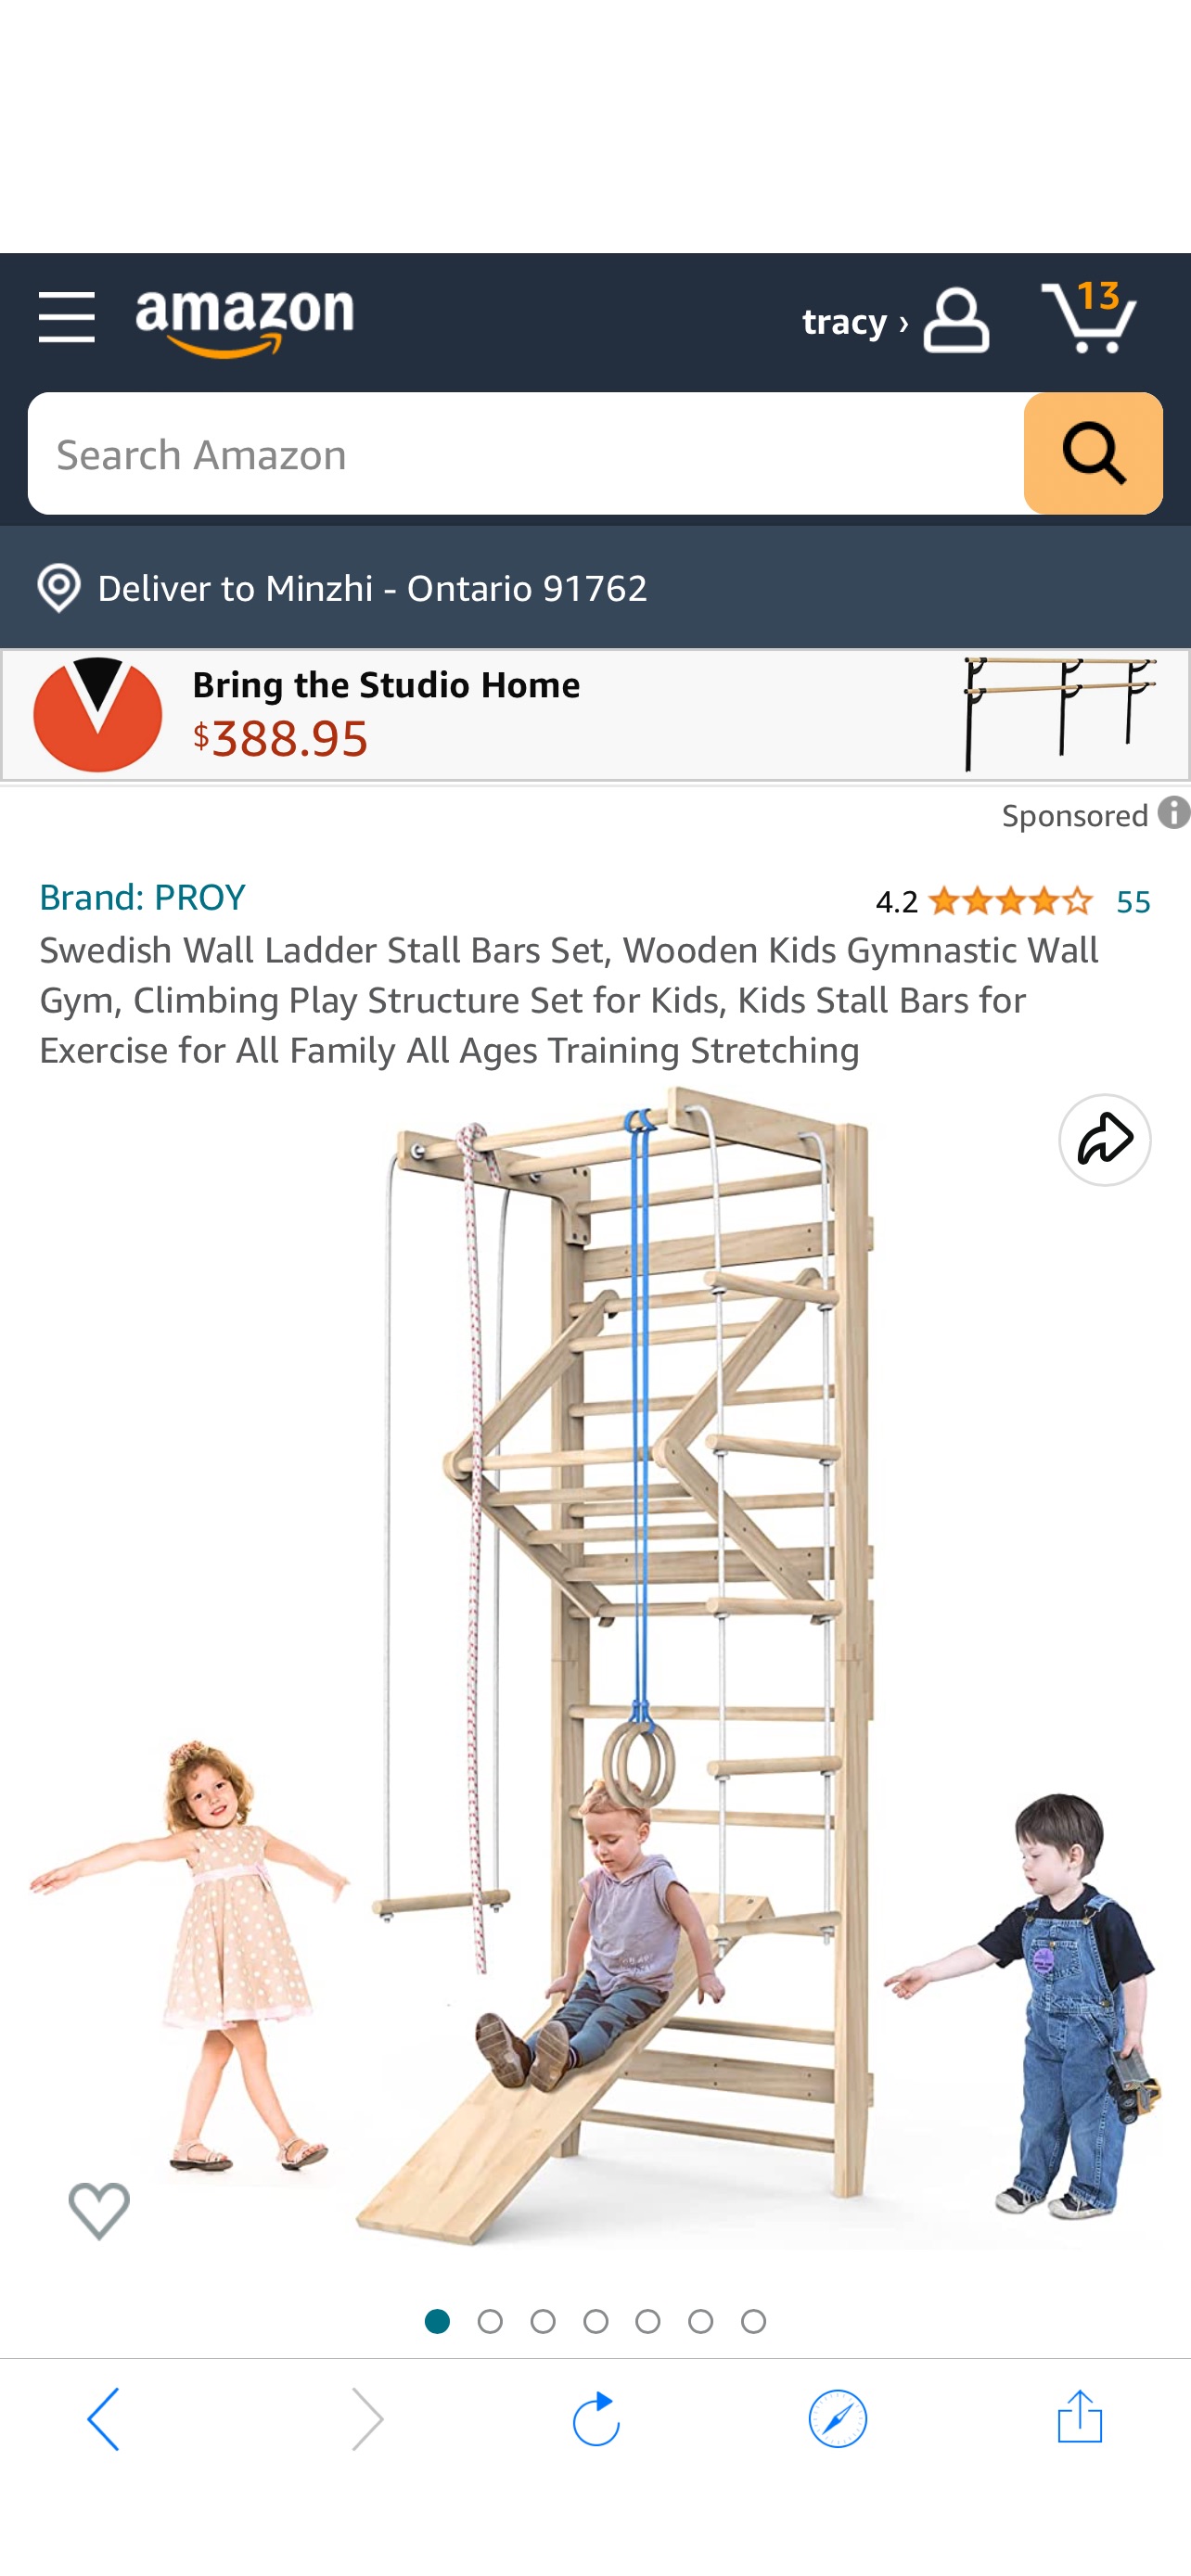 Amazon.com : Swedish Wall Ladder Stall Bars Set, Wooden Kids Gymnastic Wall Gym, Climbing Play Structure Set for Kids, Kids Stall Bars for Exercise for All Family All Ages Training Stretch